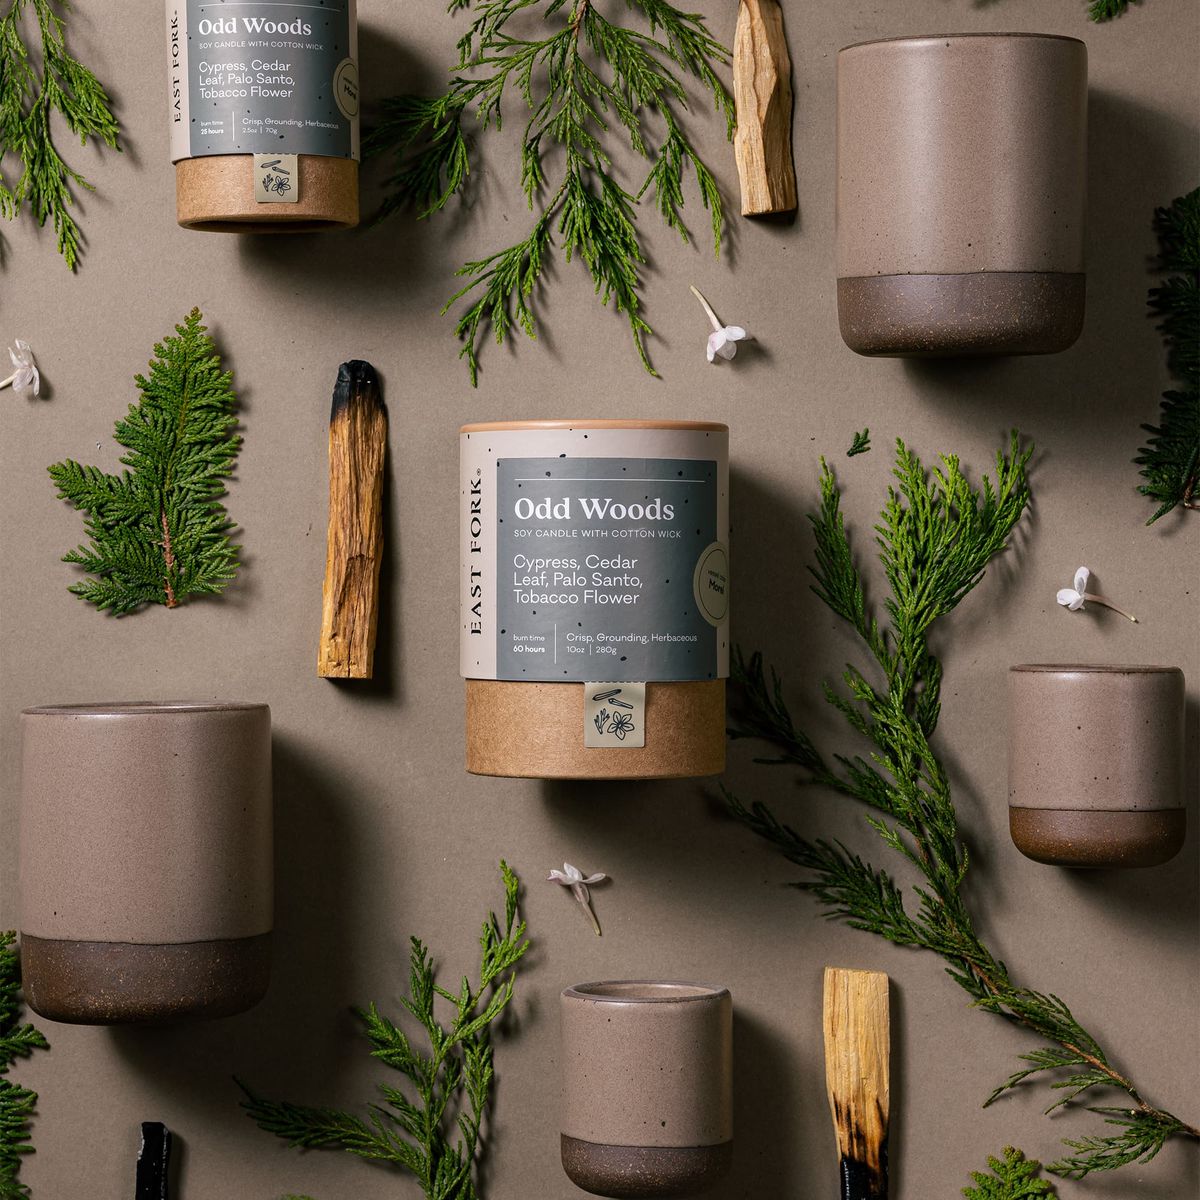 An artful layout of The Candle in Odd Woods - centered is a cardboard packaging tube with the candle's name, surrounded by small and large ceramic candles in a cylindrical vessel in a bold muted natural color, surrounded by sliced palo santo, cypress, and tiny flowers.